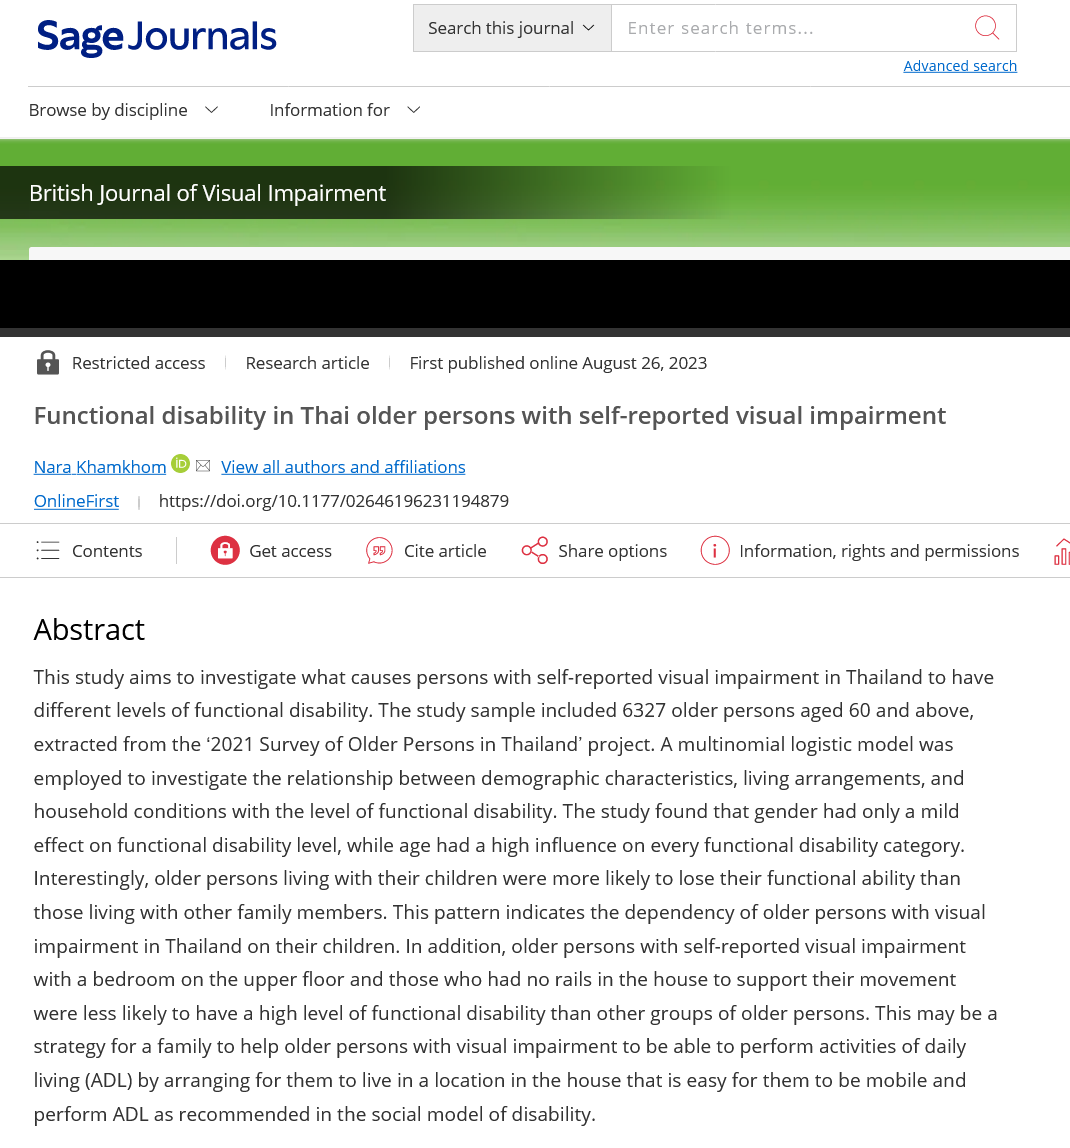 Functional disability in Thai older persons with self-reported visual impairment